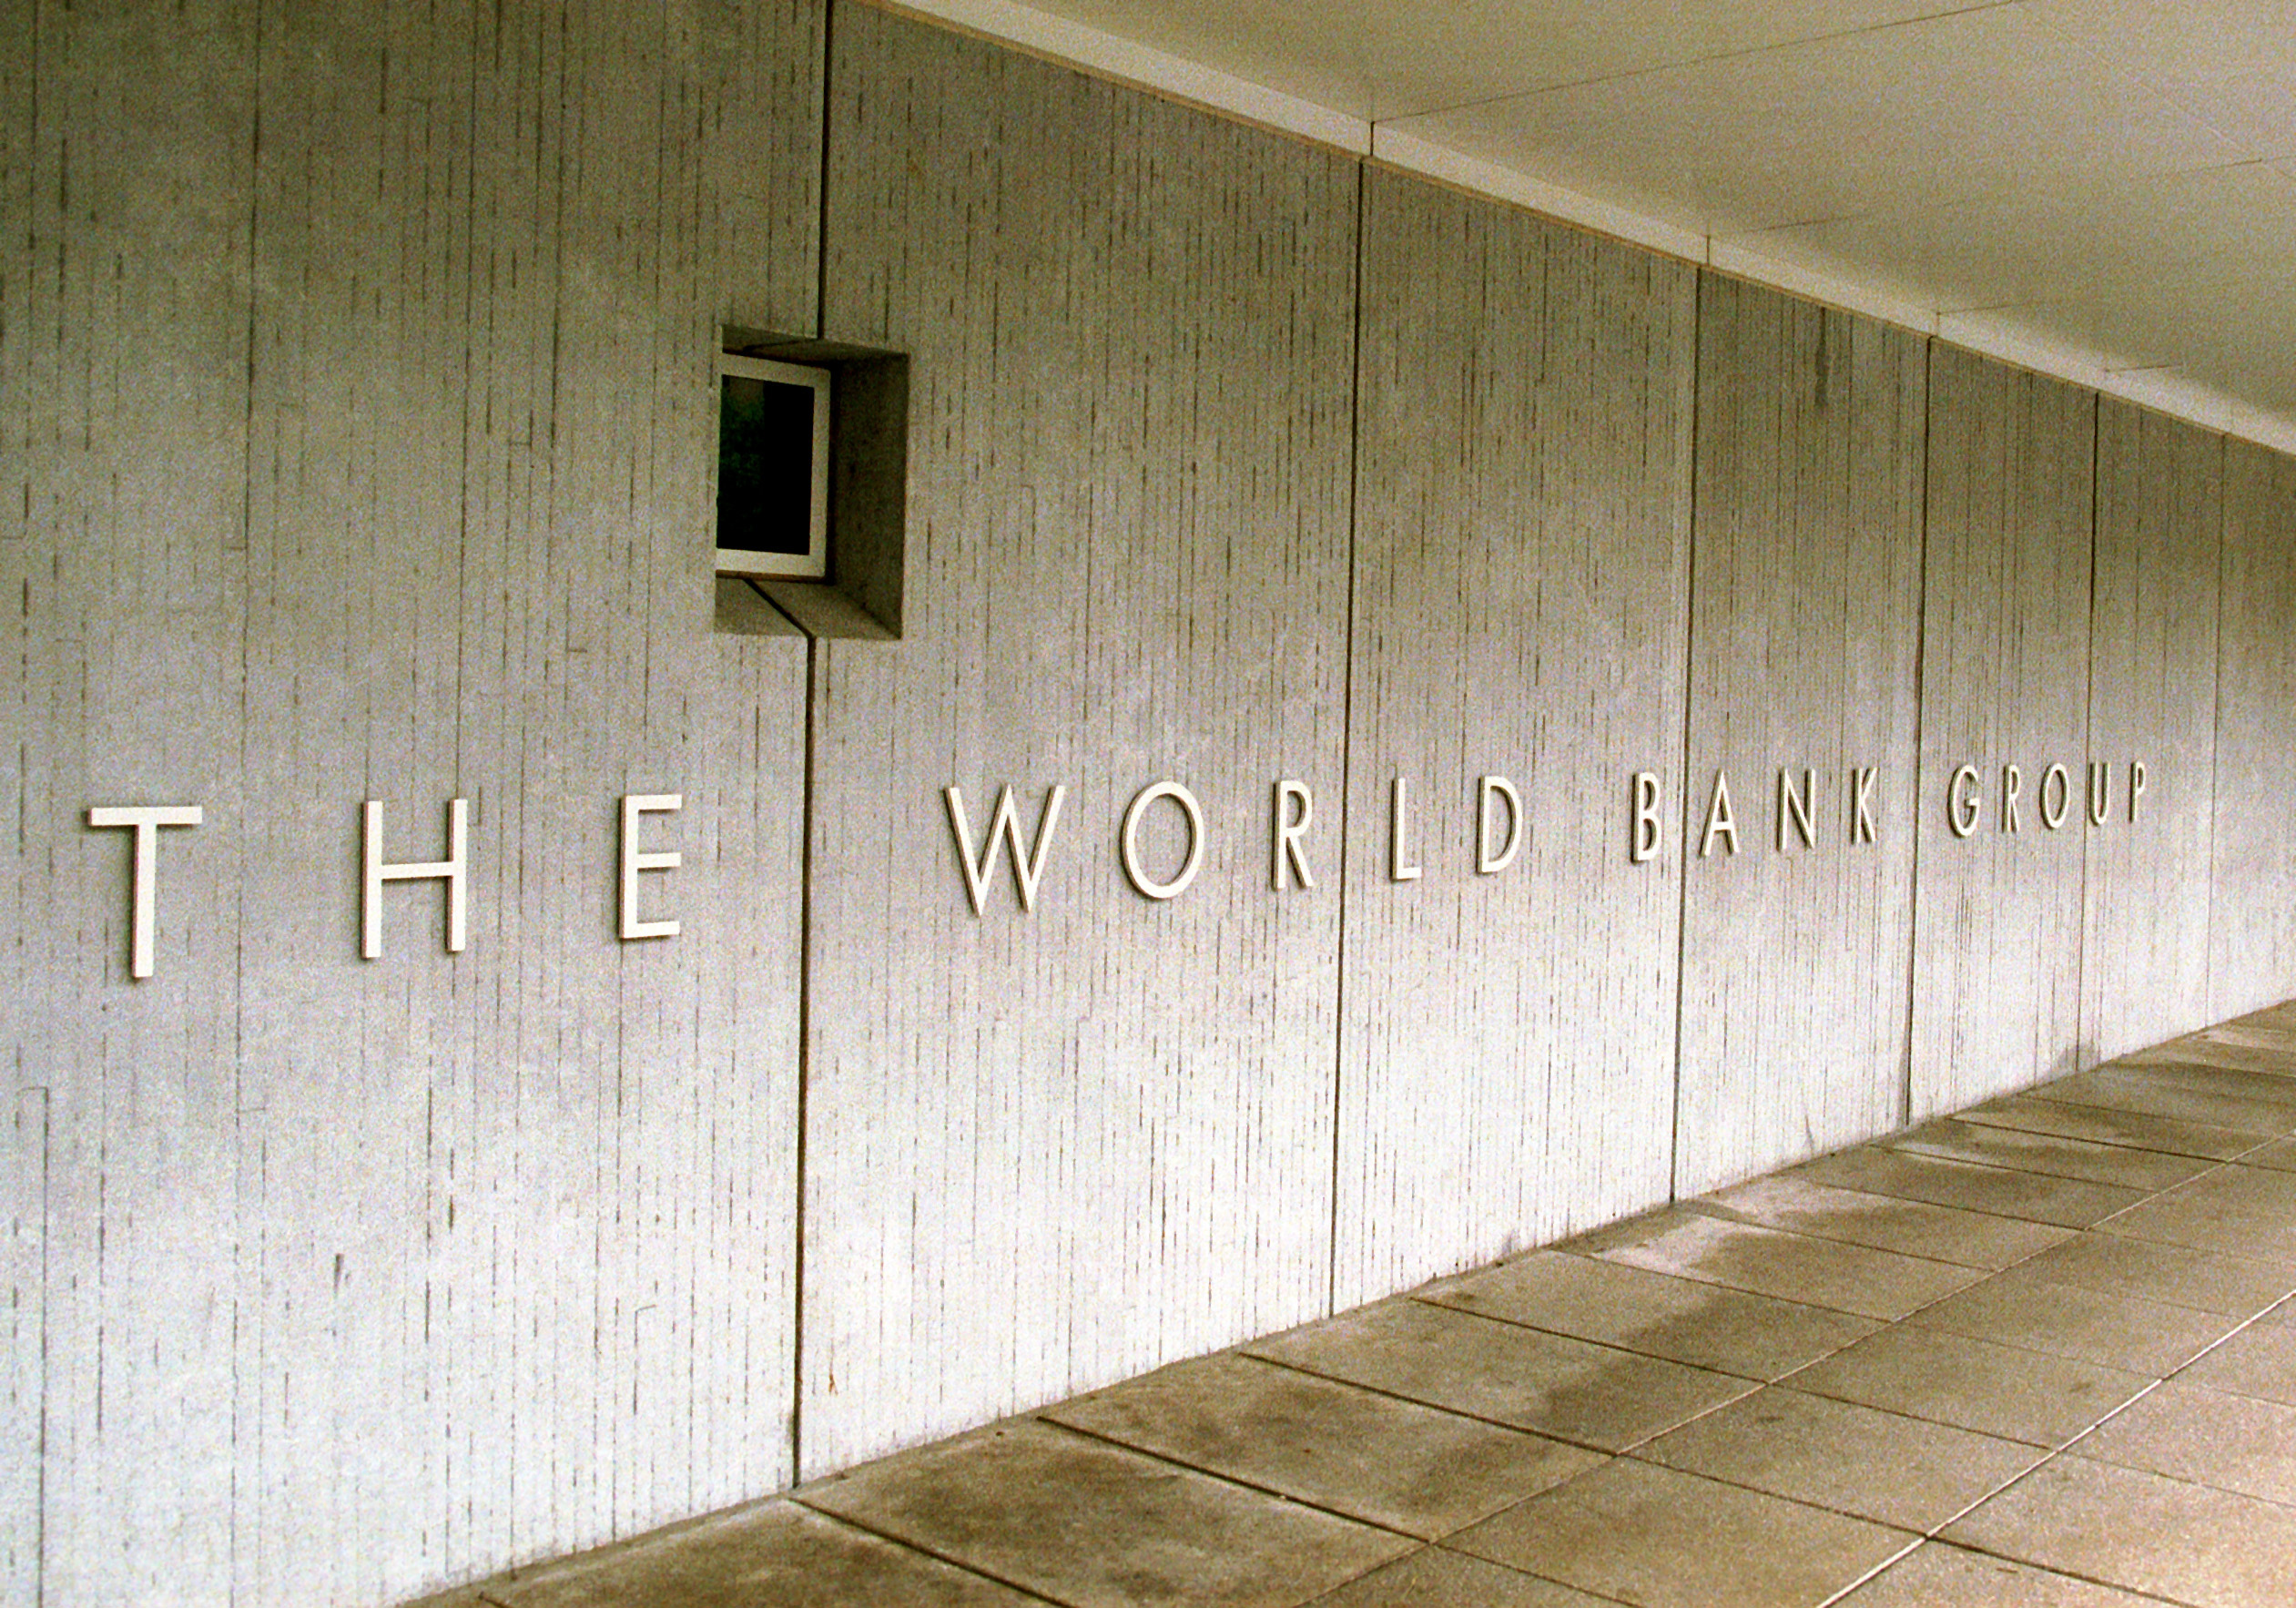 The "World Bank Group" inscription on the main building of the World Bank in Washington